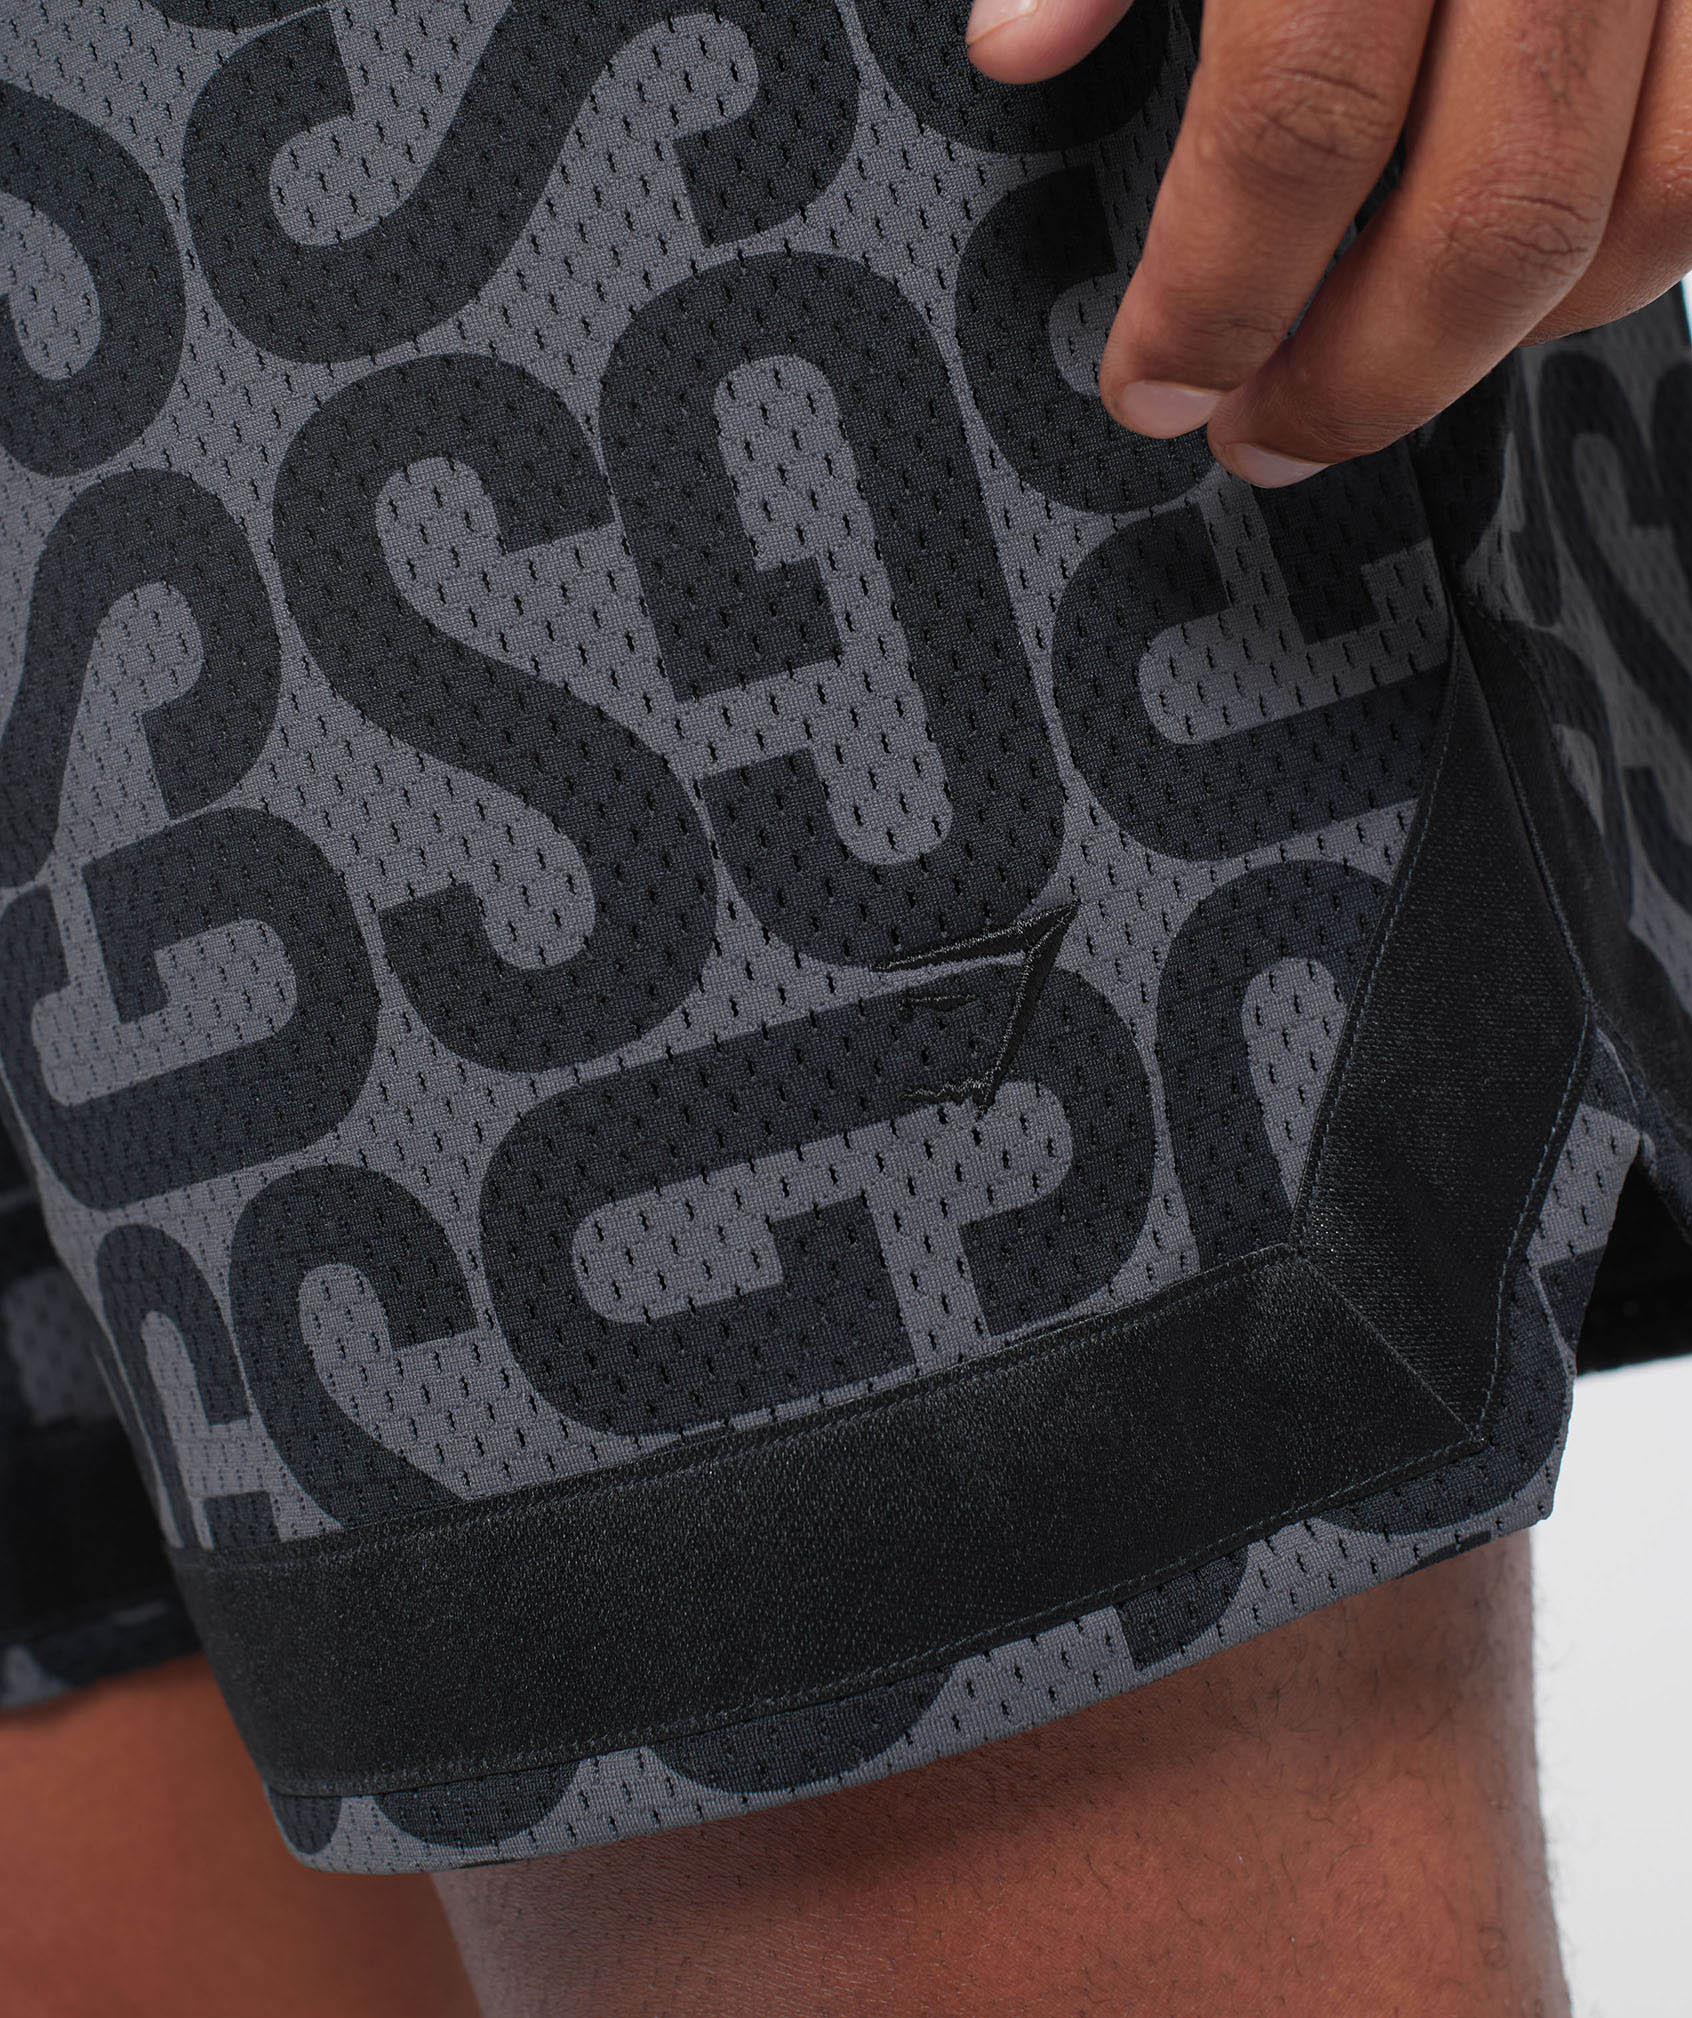 Rest Day Shorts in Black/Onyx Grey - view 6